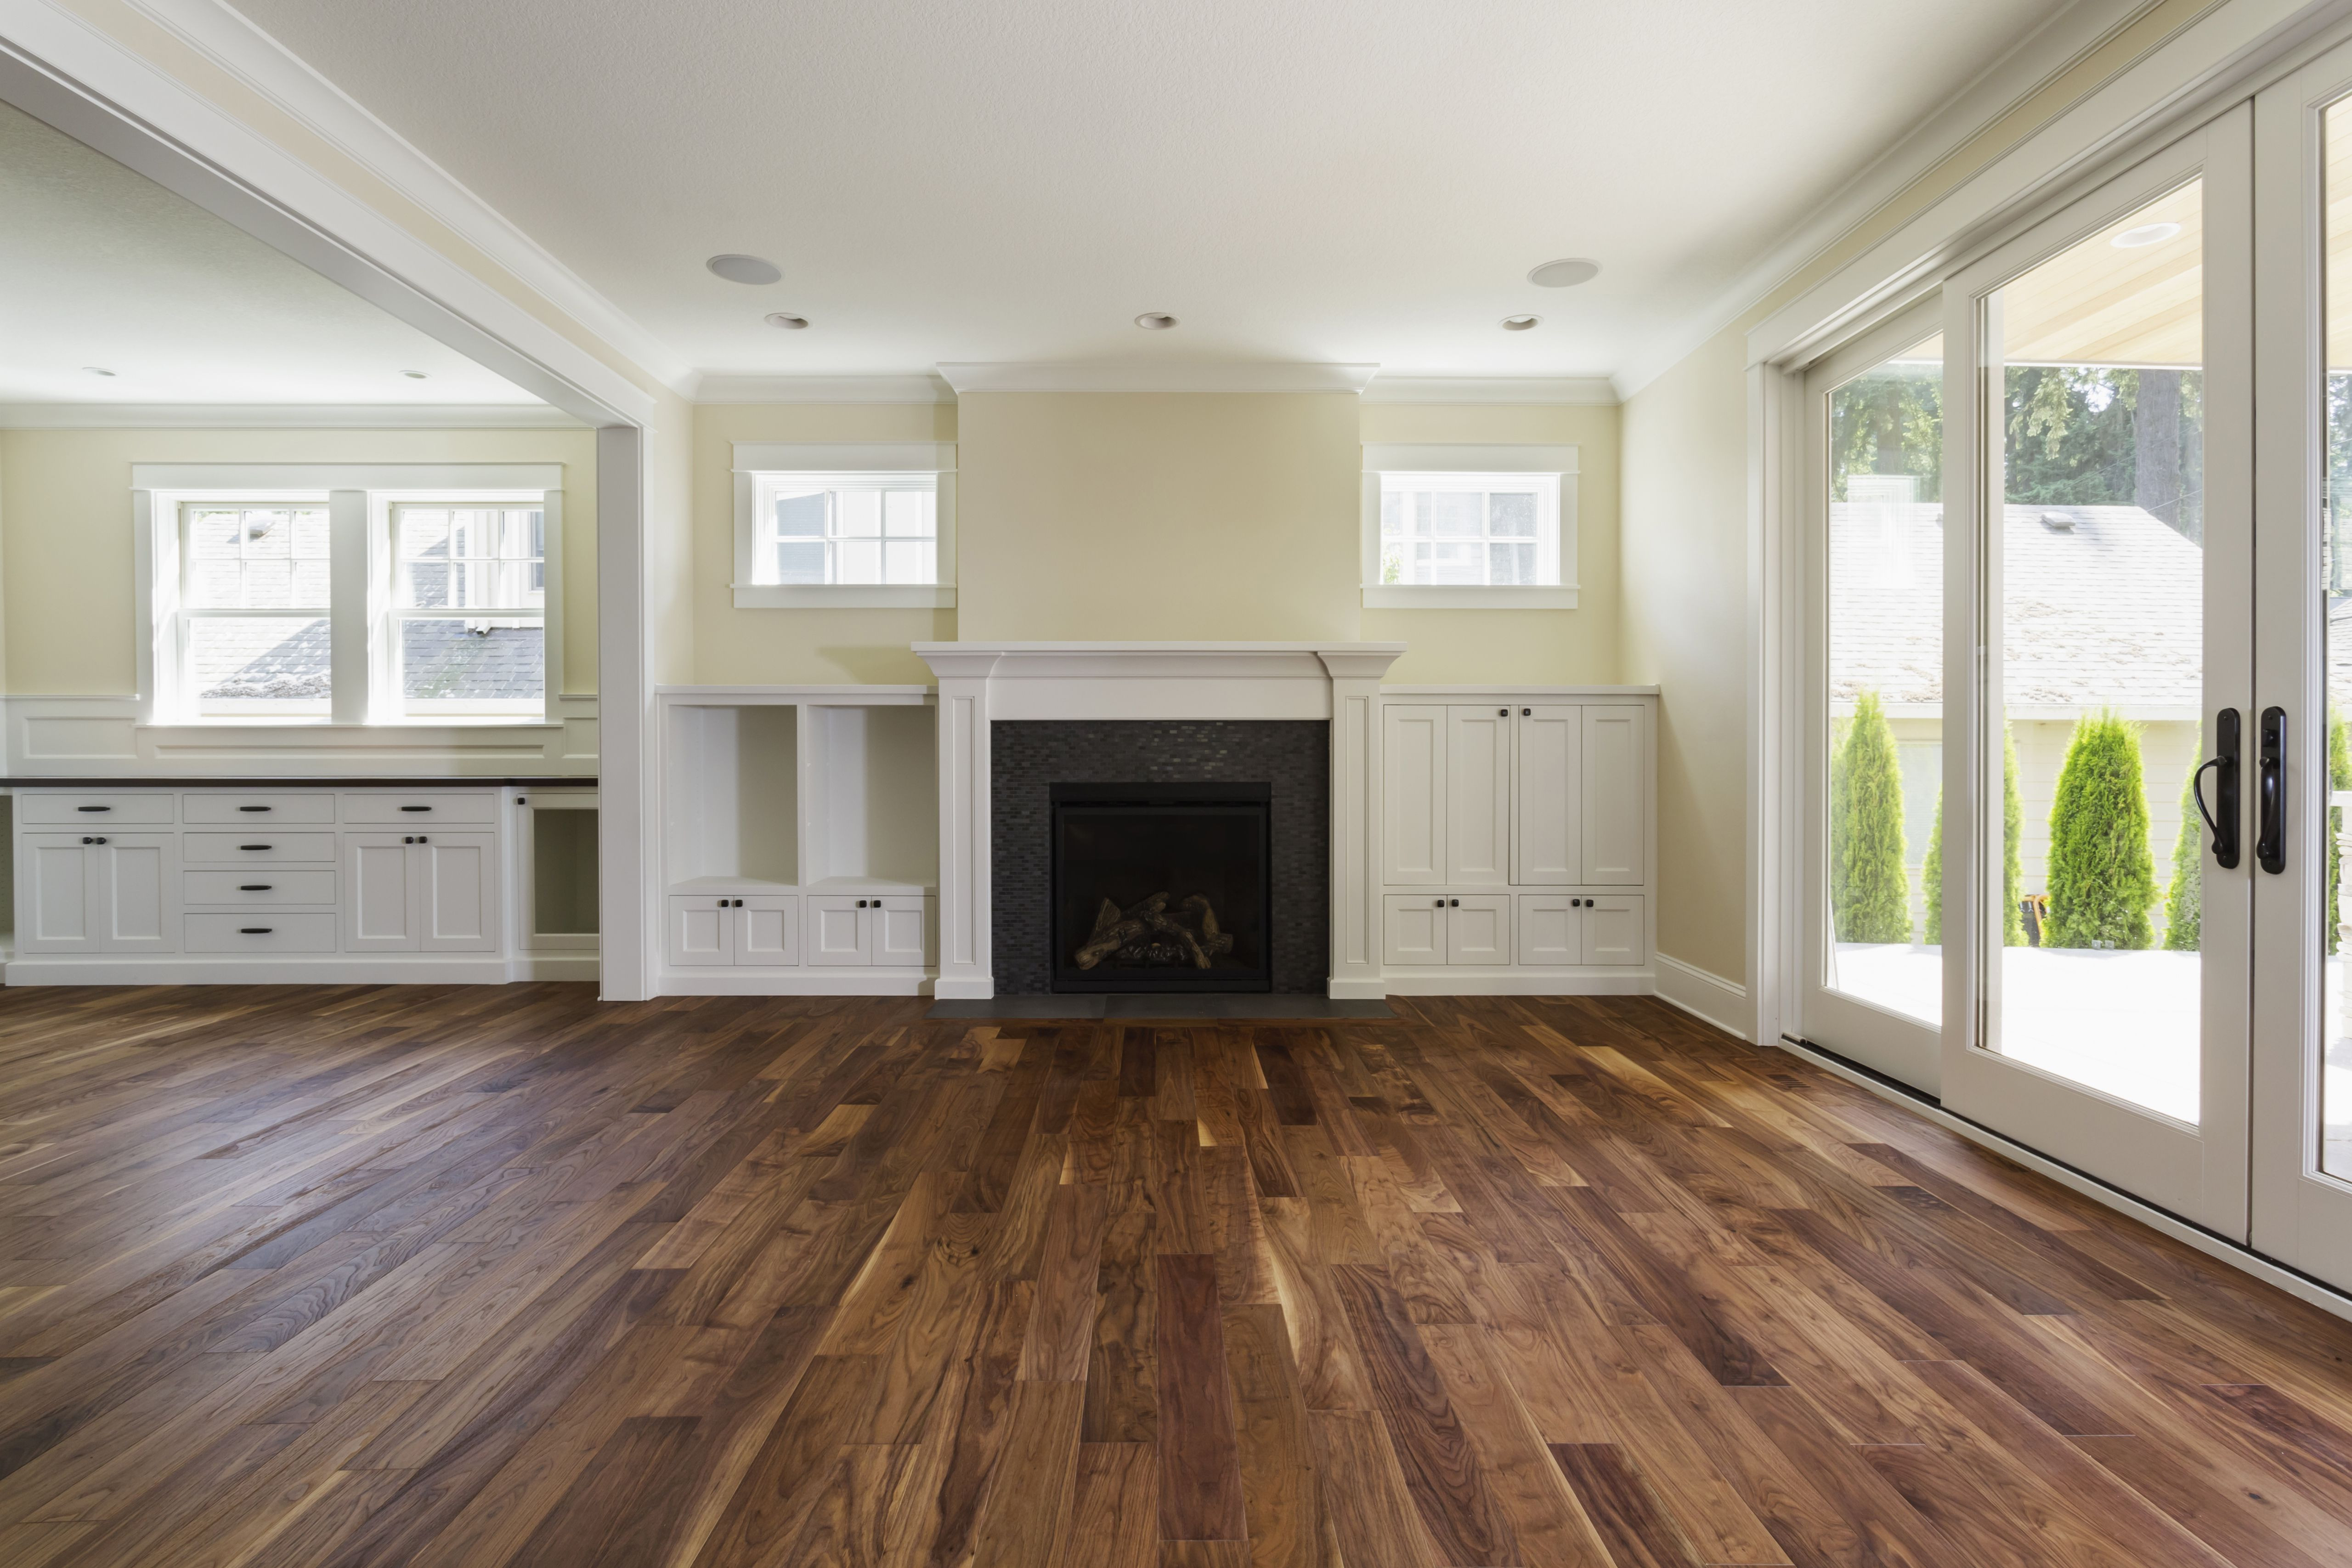 Laminate Flooring Vs Engineered Hardwood Of the Pros and Cons Of Prefinished Hardwood Flooring with Fireplace and Built In Shelves In Living Room 482143011 57bef8e33df78cc16e035397